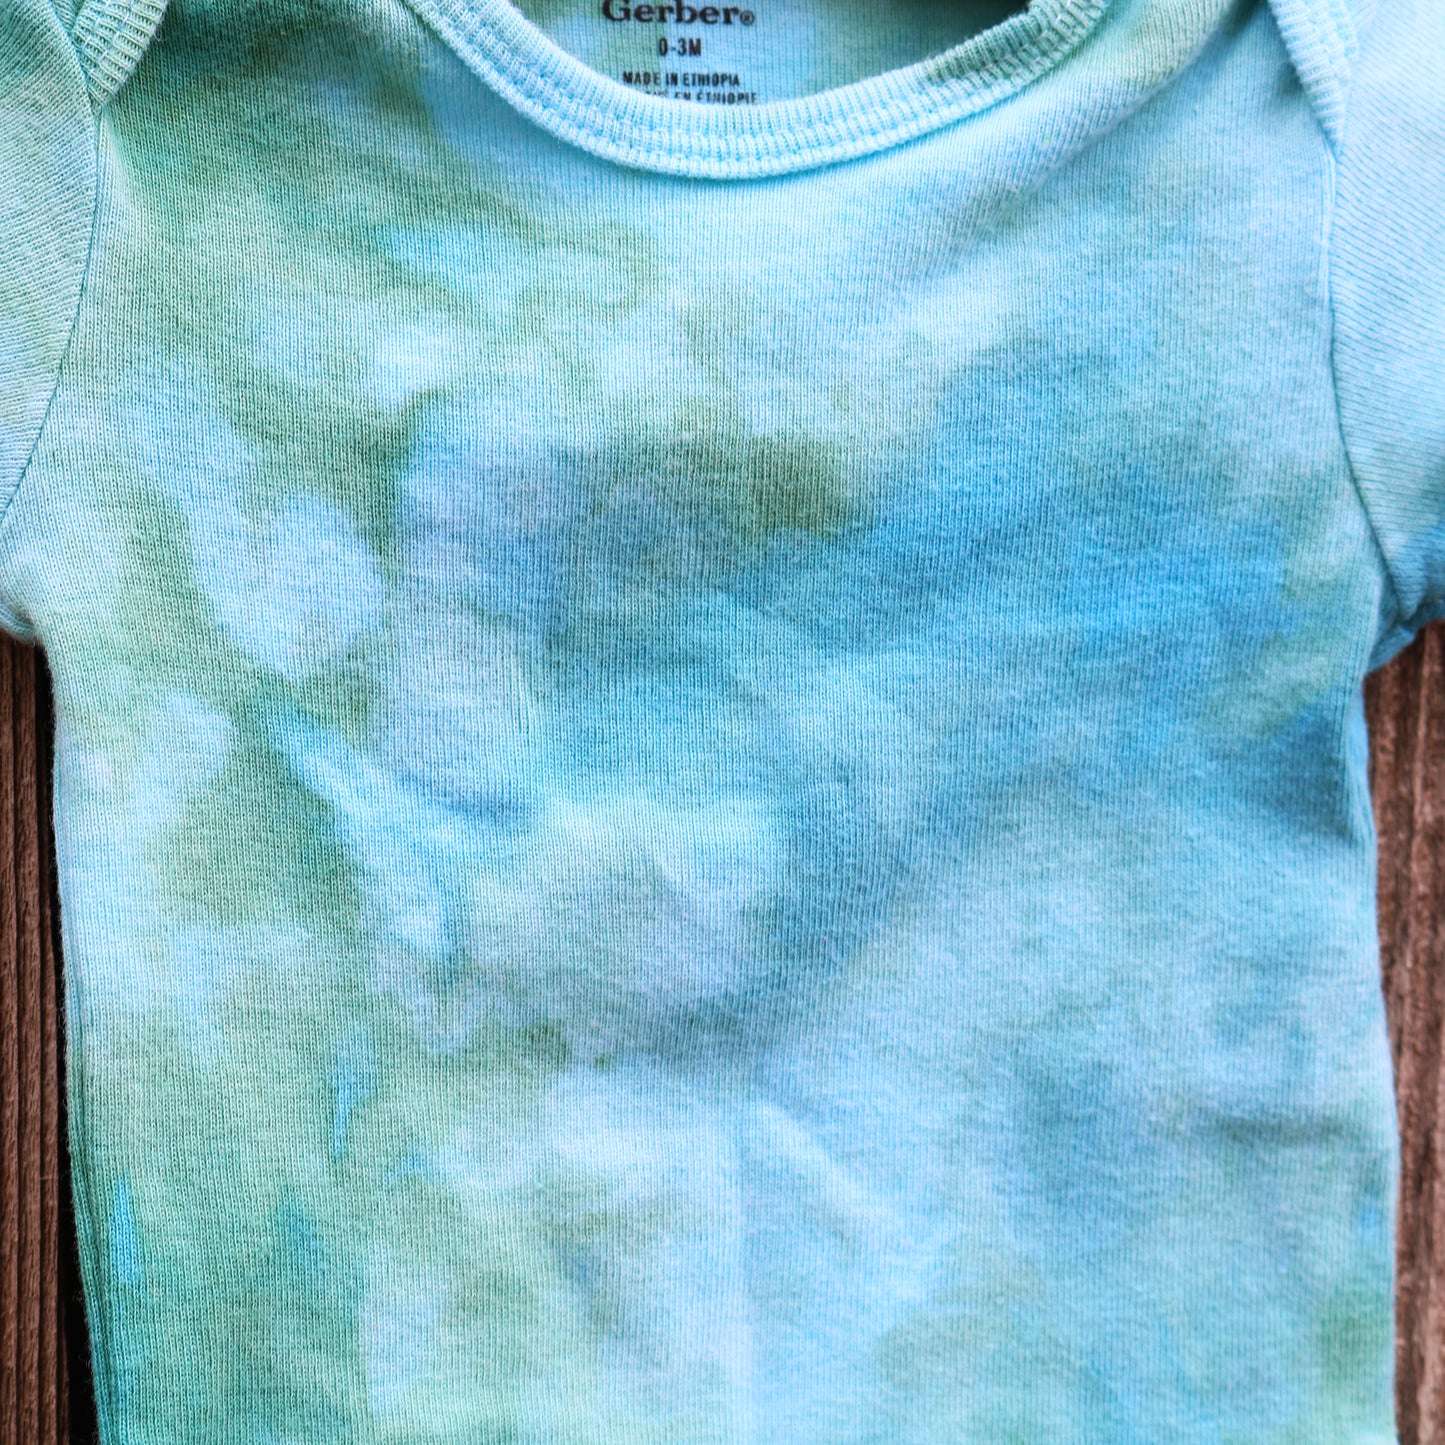 Hand Dyed Onesie- 0-3 mo